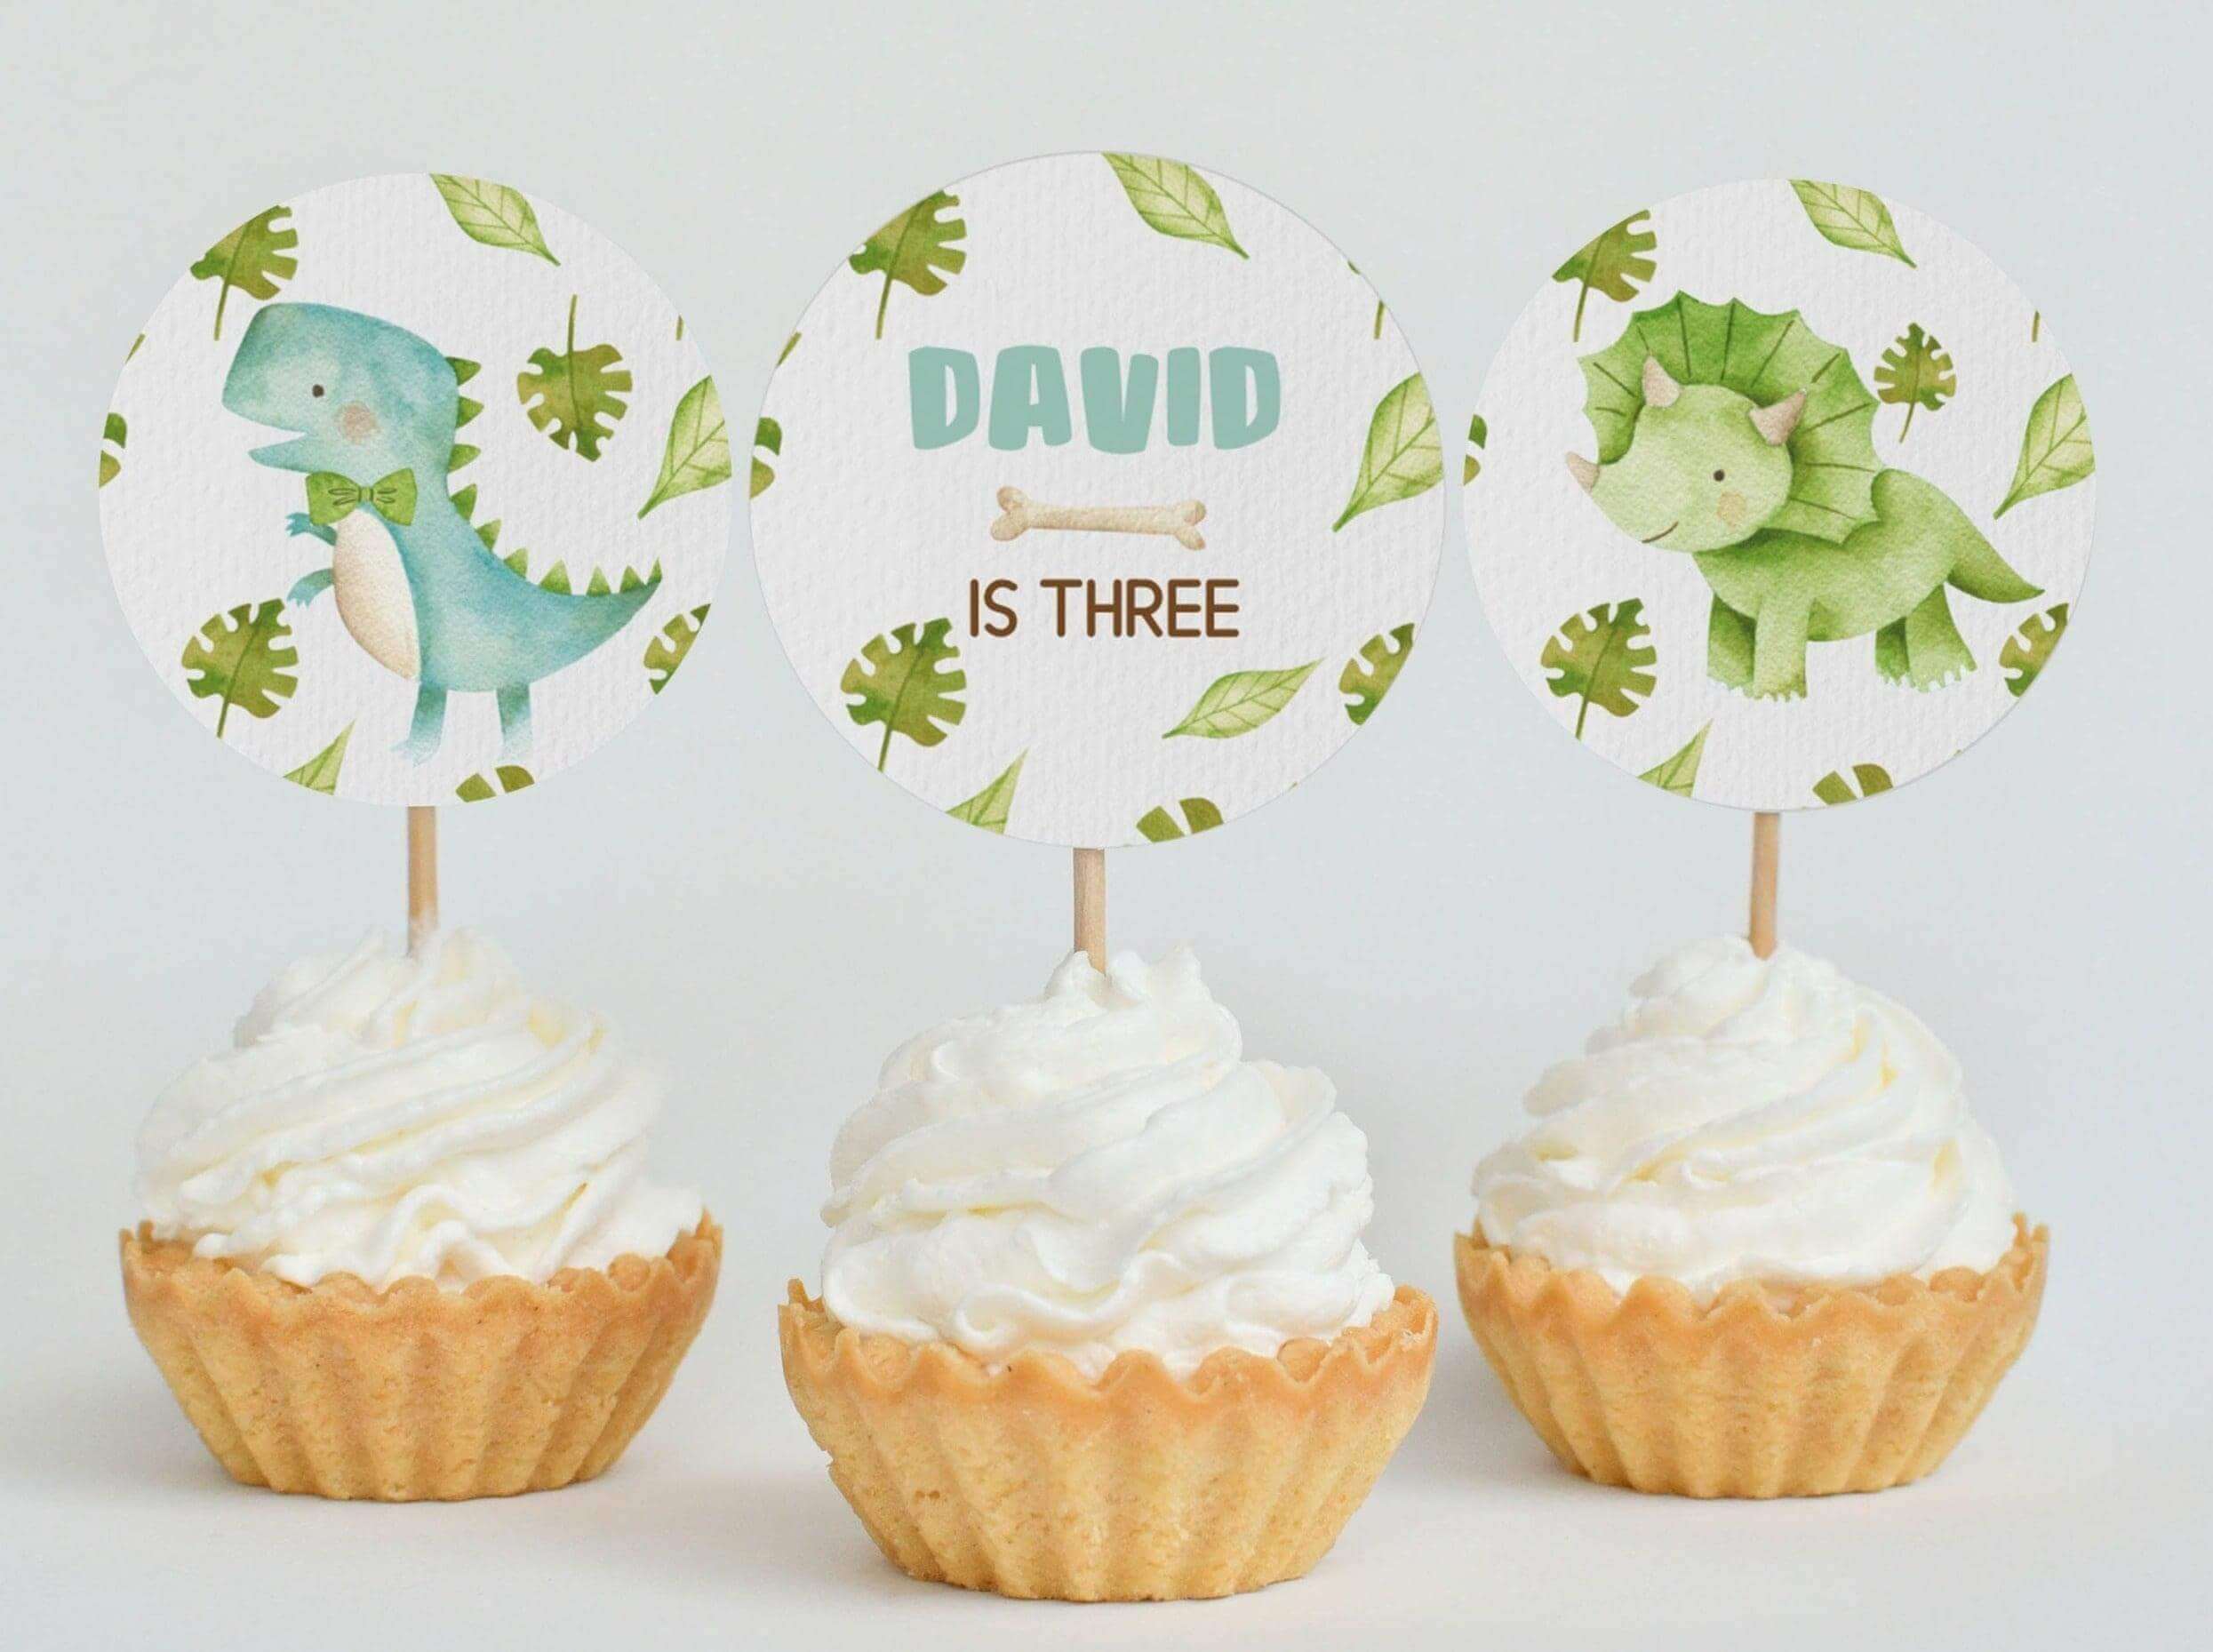 Dinosaur family on volcano island cake and cupcake topper edible Icing